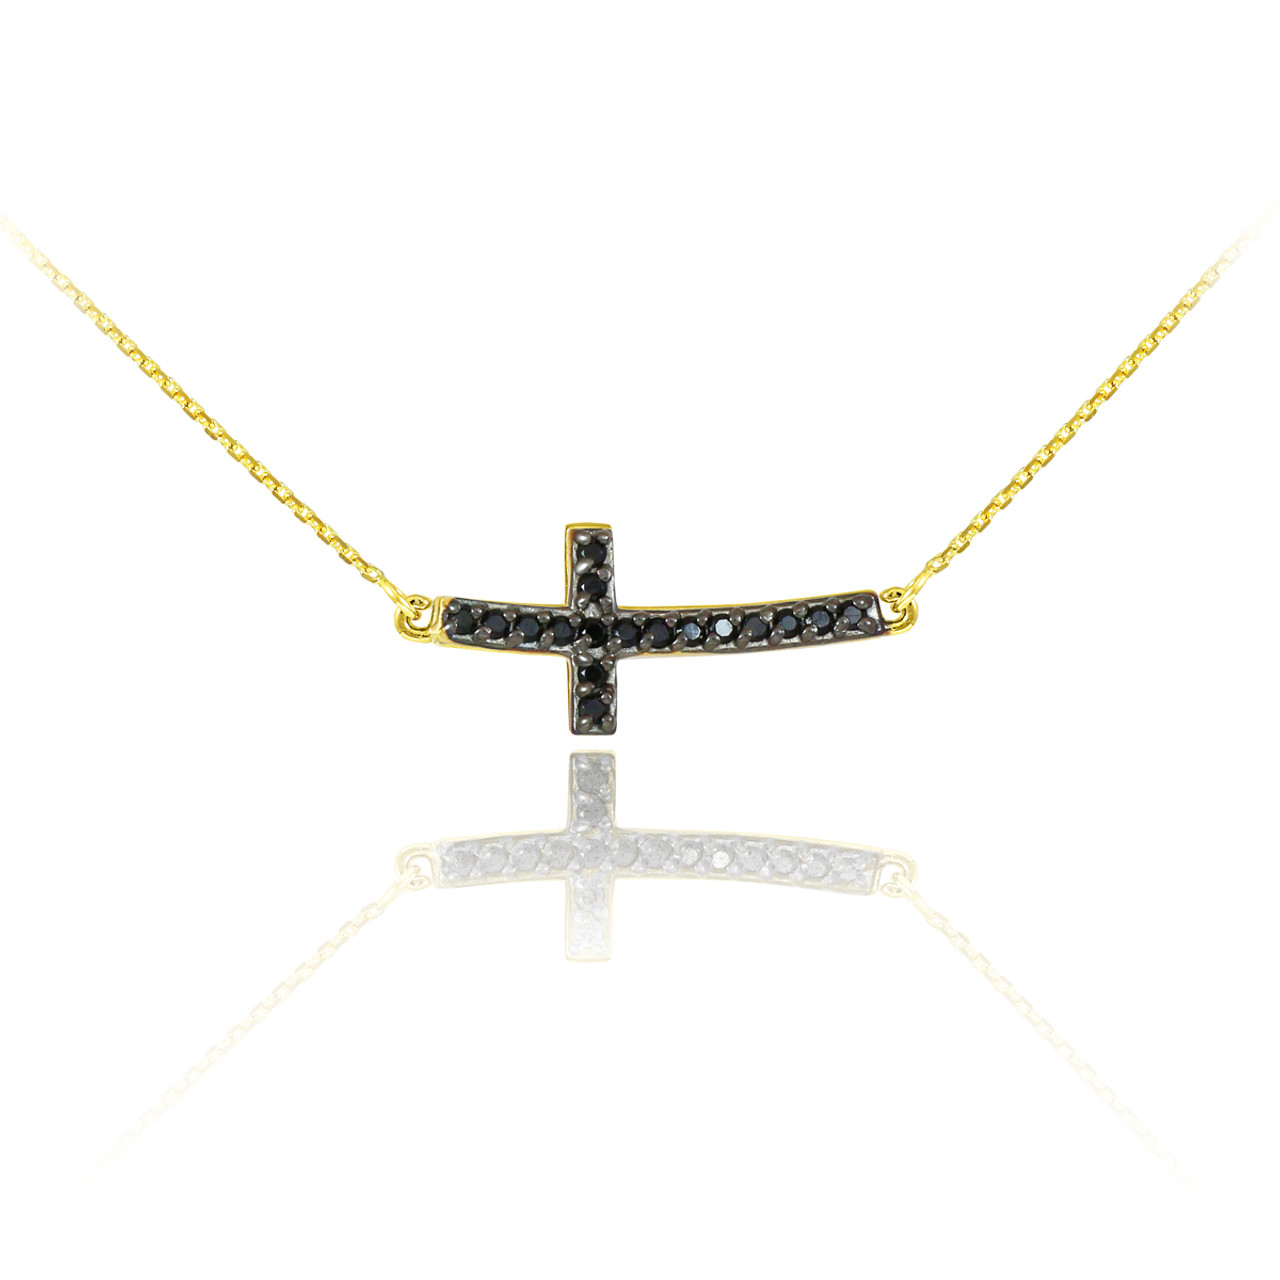 19.5mm Sideways Beaded Cross Necklace in 14k White Gold, 16.5 Inch - The  Black Bow Jewelry Company